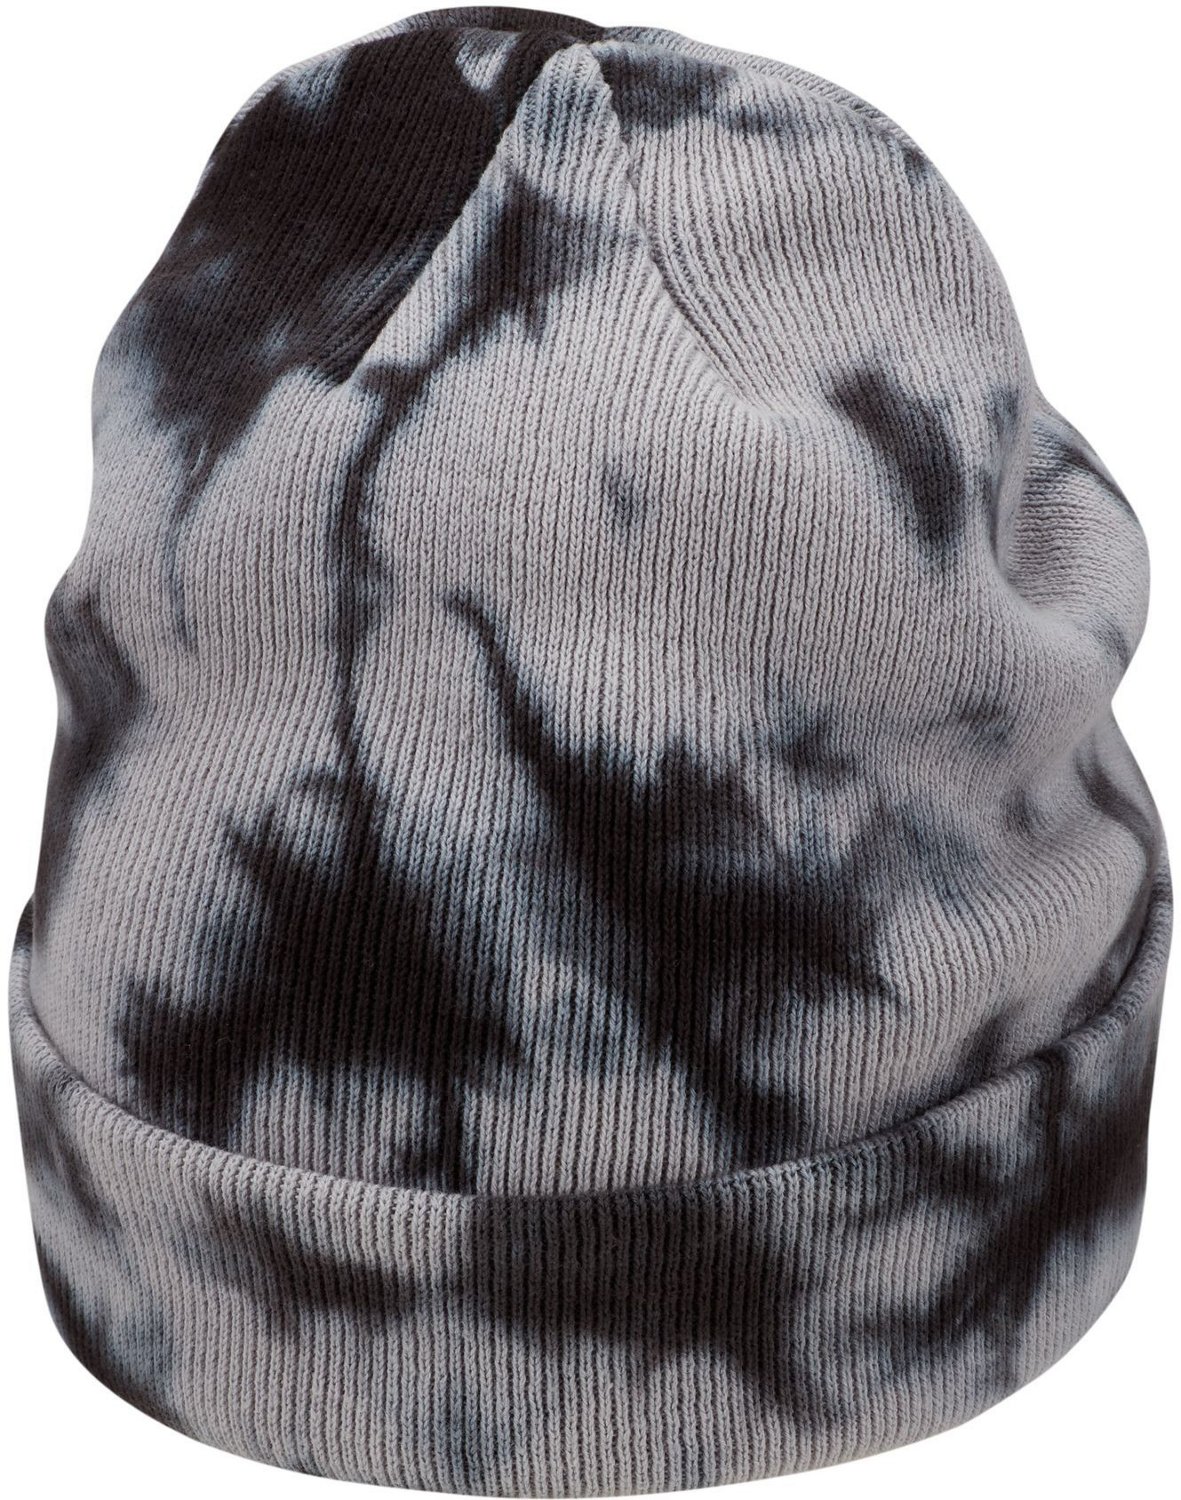 Academy Terra Shipping Free at Tie-Dye Nike | Adults\' Beanie